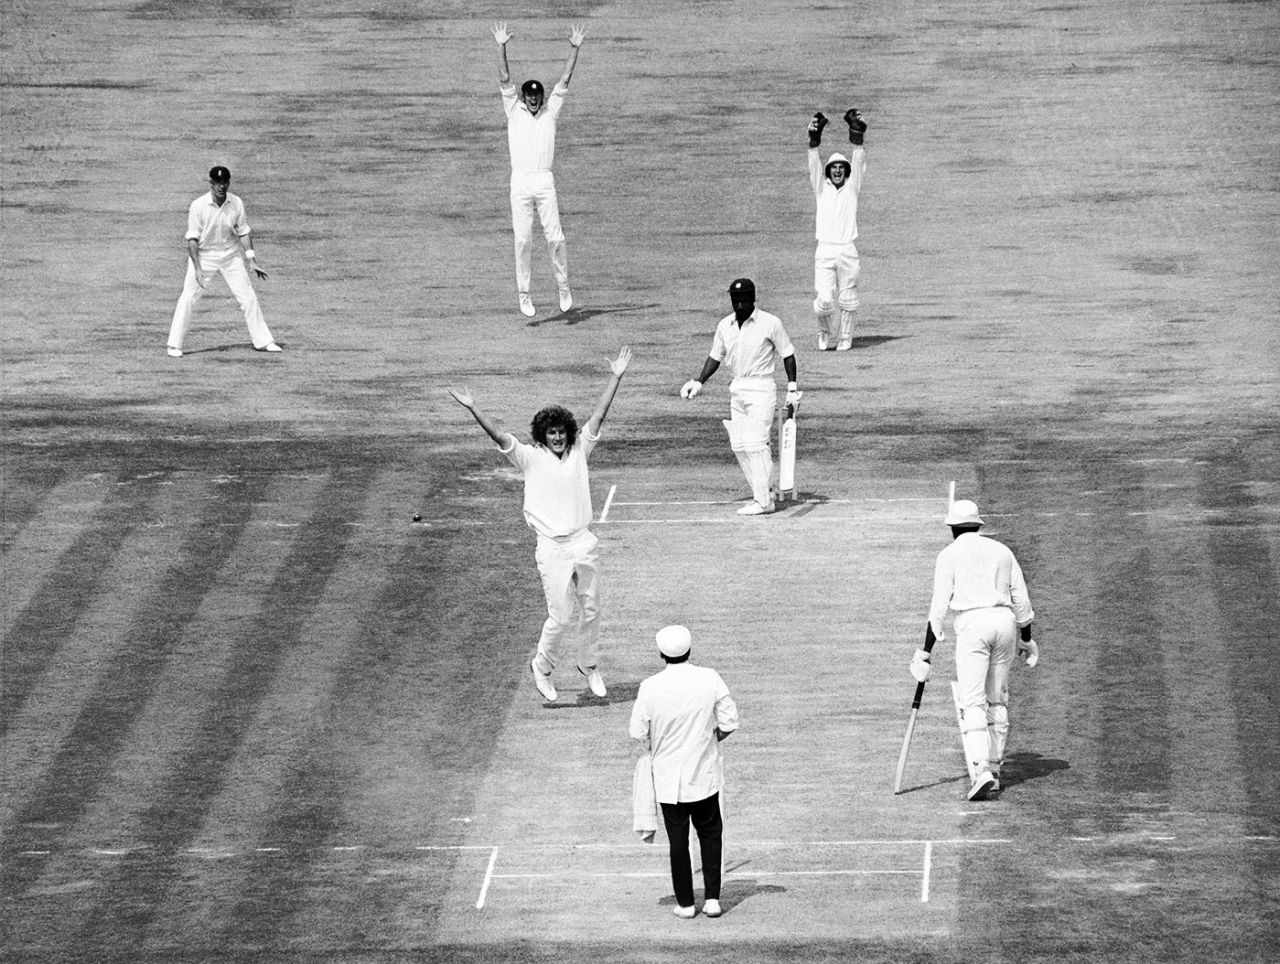 Bob Willis appeals for the wicket of Viv Richards, England v West Indies, 5th Test, The Oval, 1st day, August 12, 1976